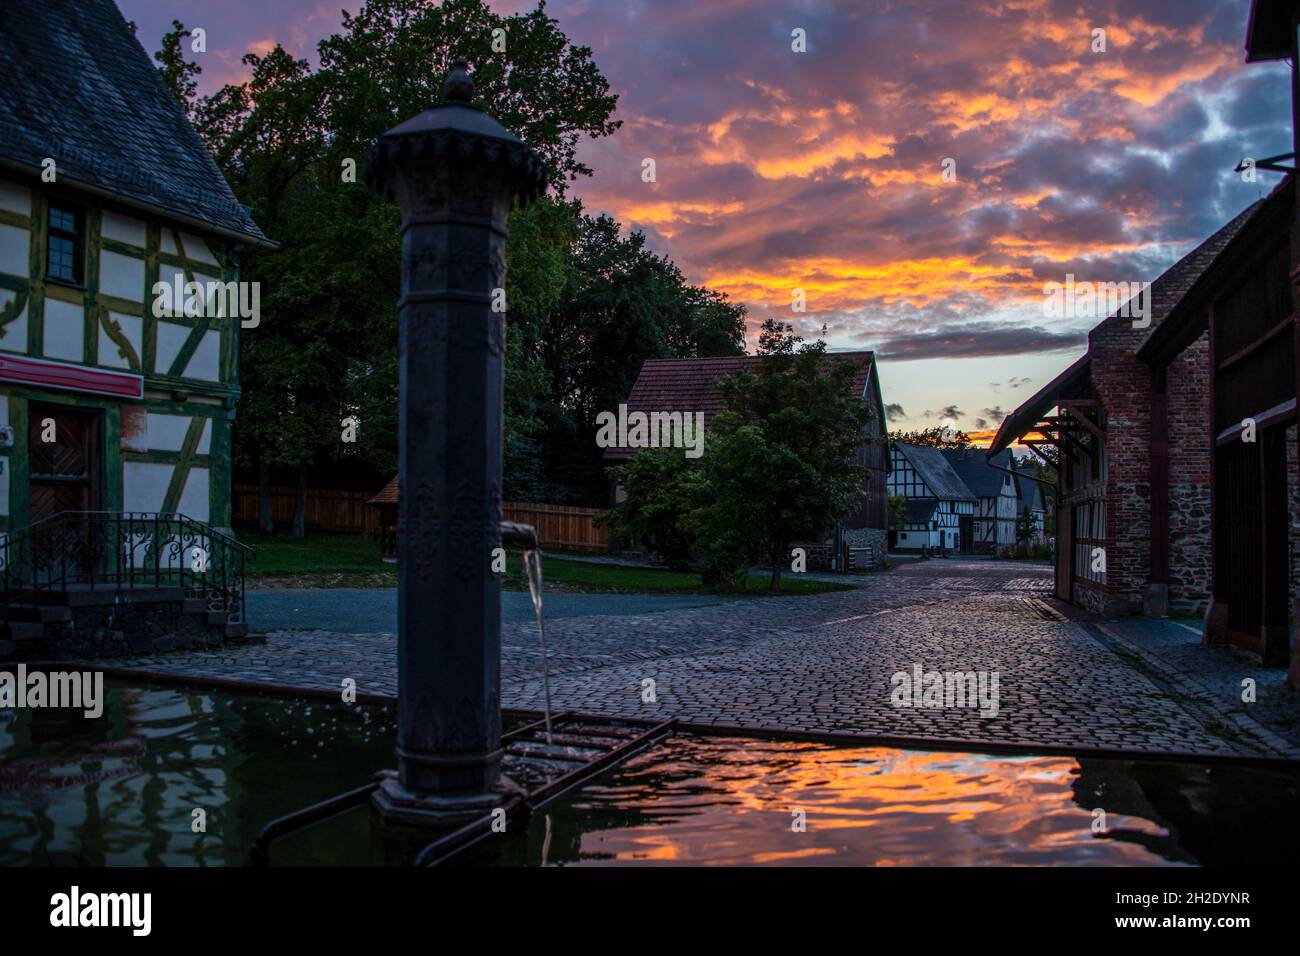 Timbering houses in a historic village under the colorful cloudy sky in the sunset Stock Photo